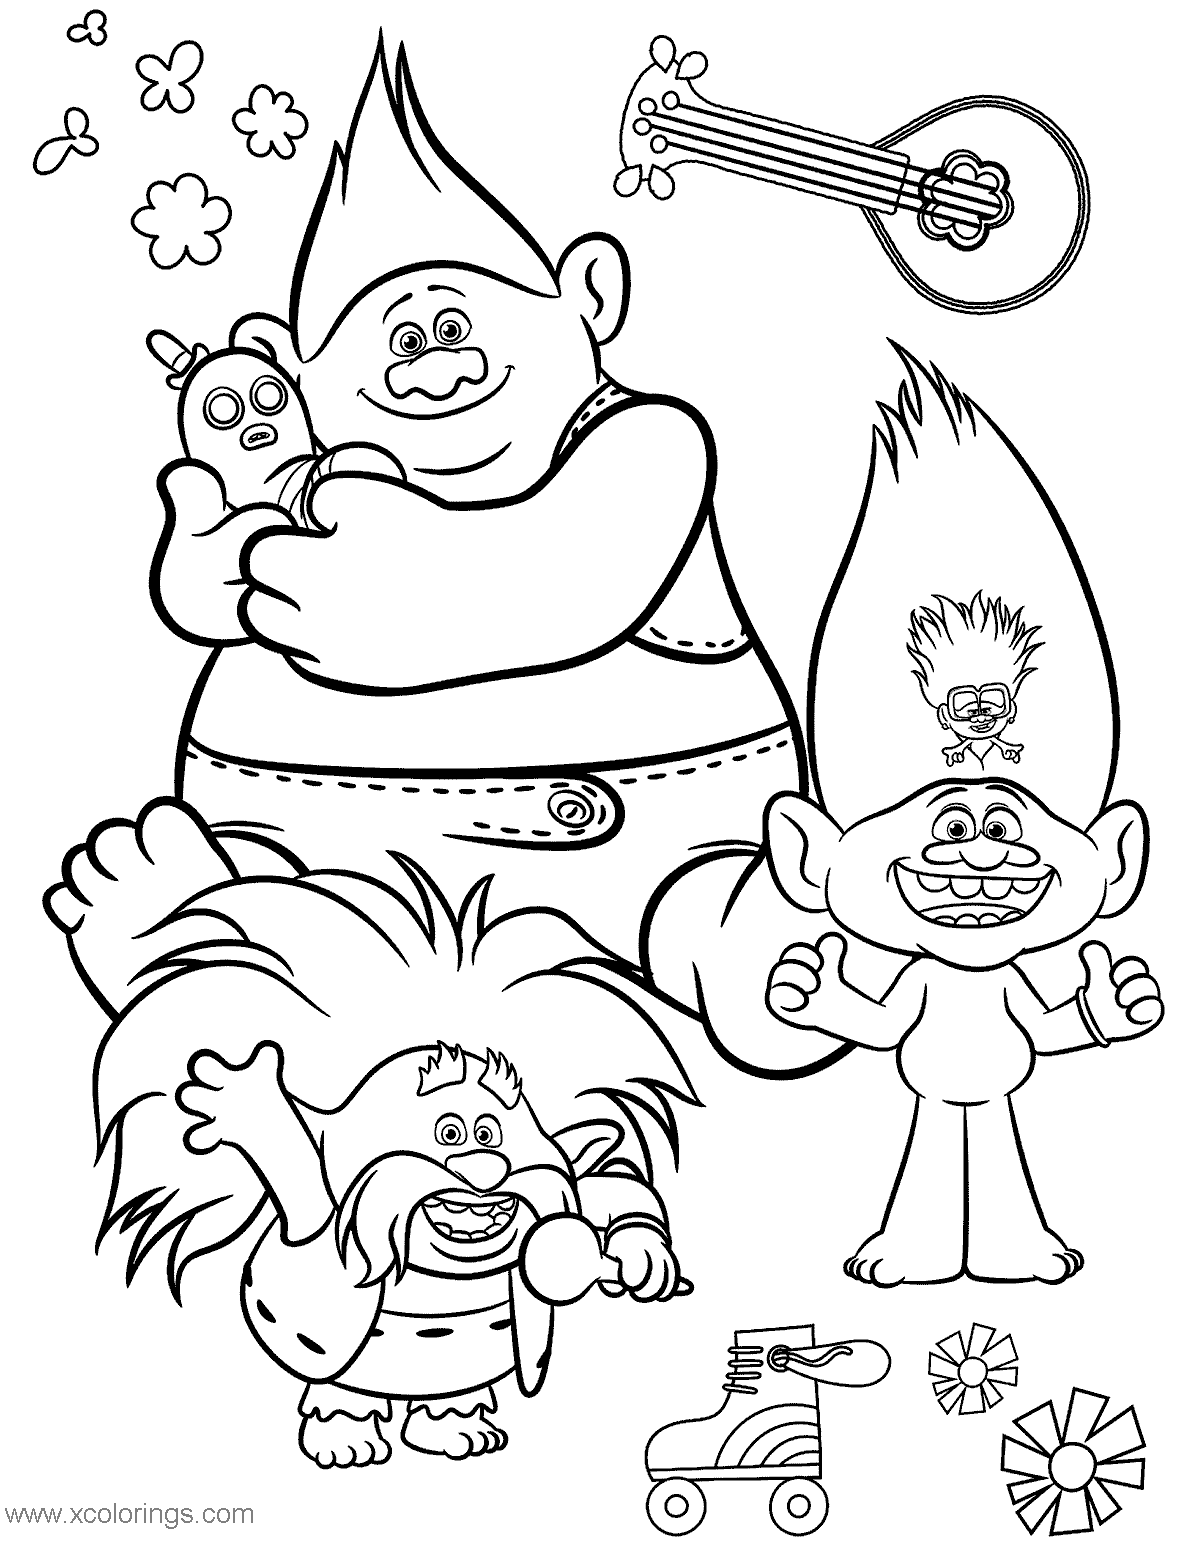 Free Branch and Friends from Trolls World Tour Coloring Pages printable